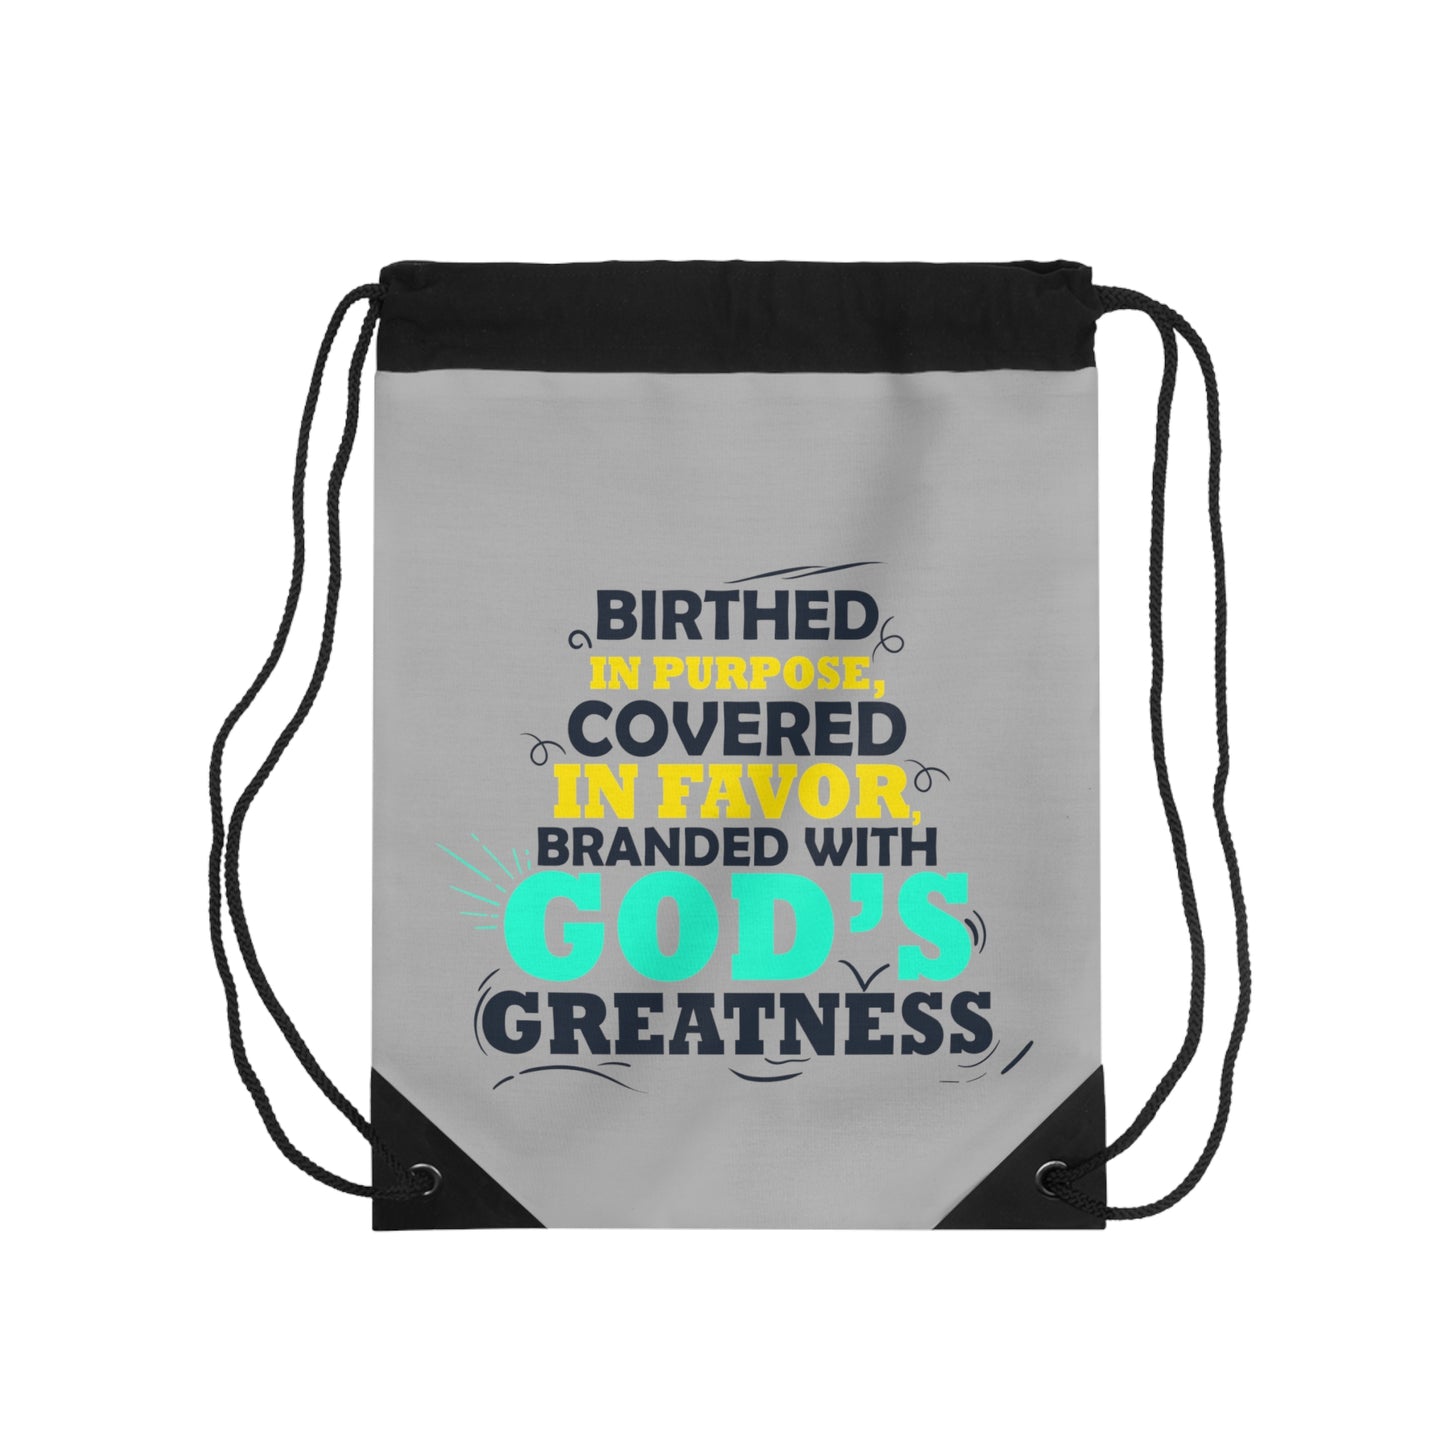 Birthed In Purpose Covered In Faver Branded With God's Greatness Drawstring Bag